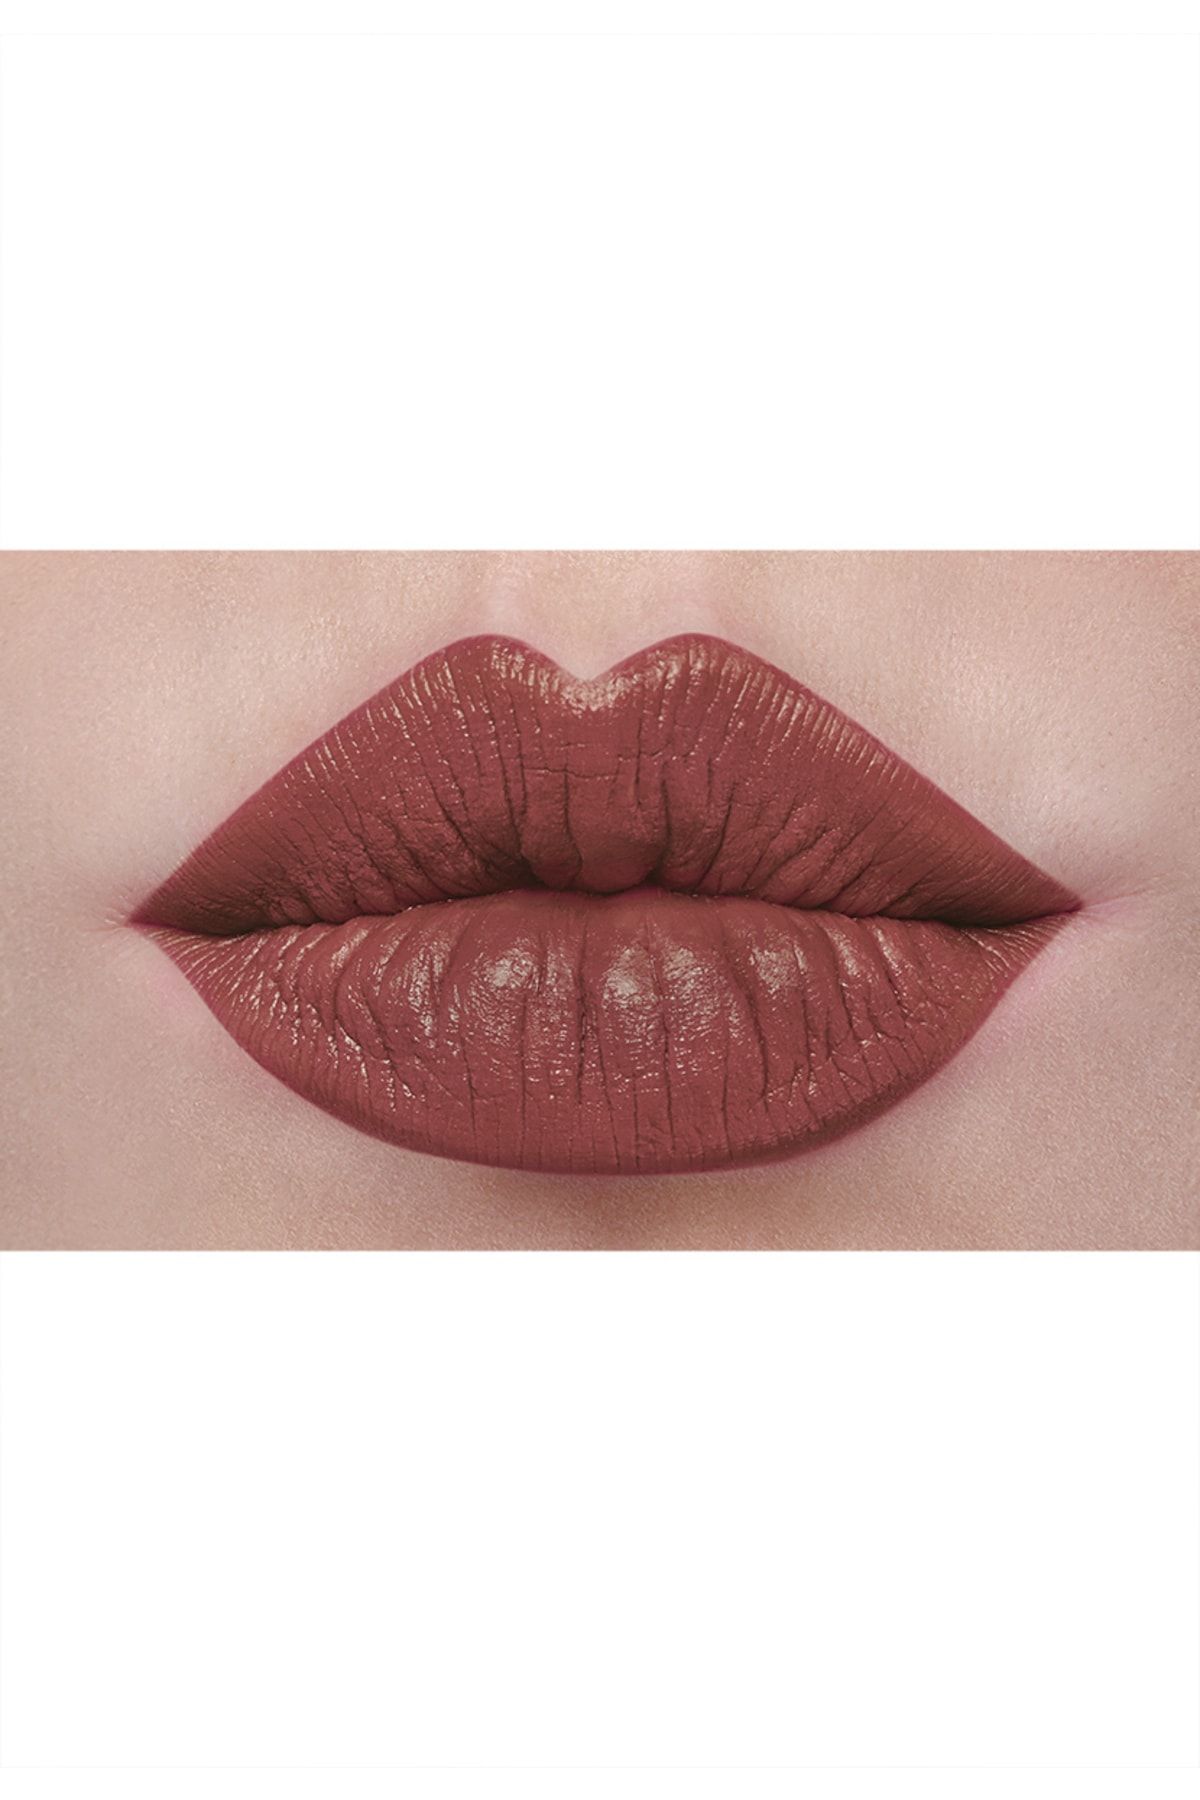 Faberlic Hd Color Lipstick Shade "Miss Brown" - 4.0 gr